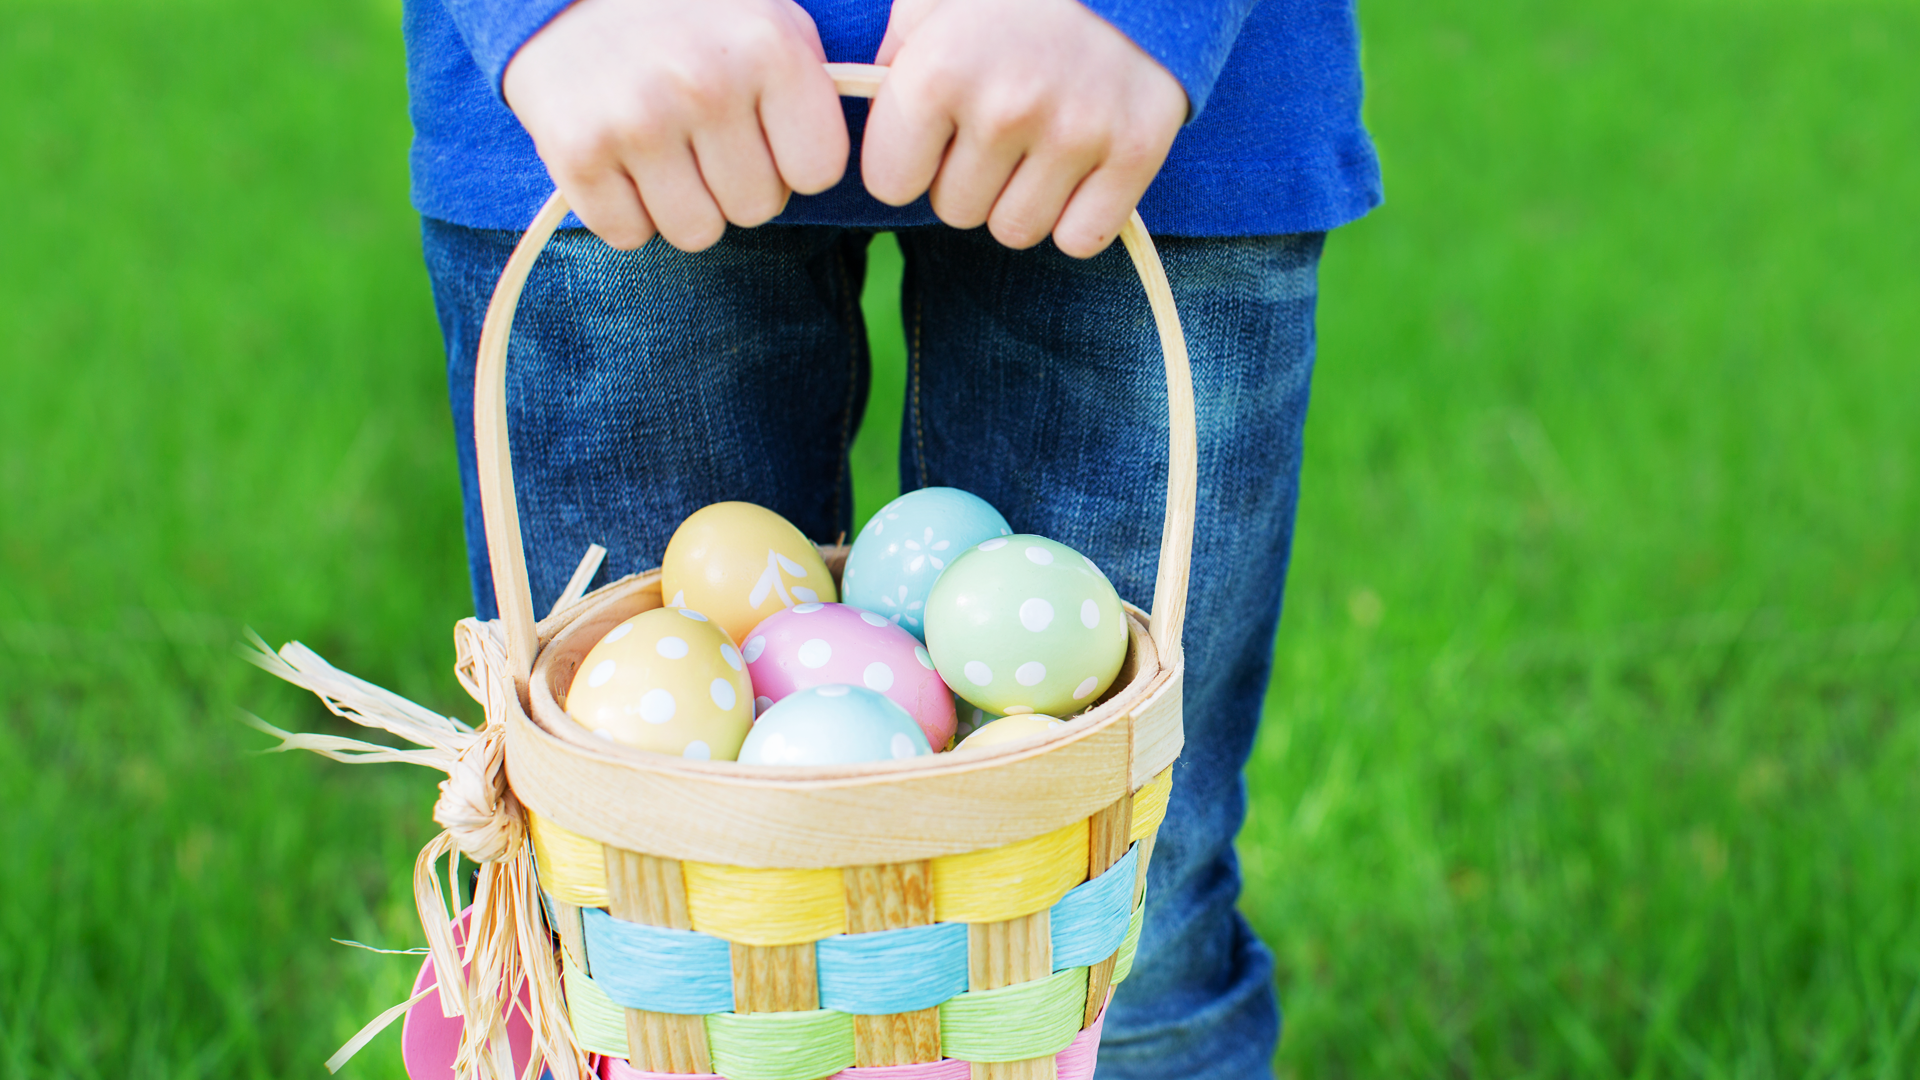 Here is a list of Easter egg hunts in Miami-Dade, Broward